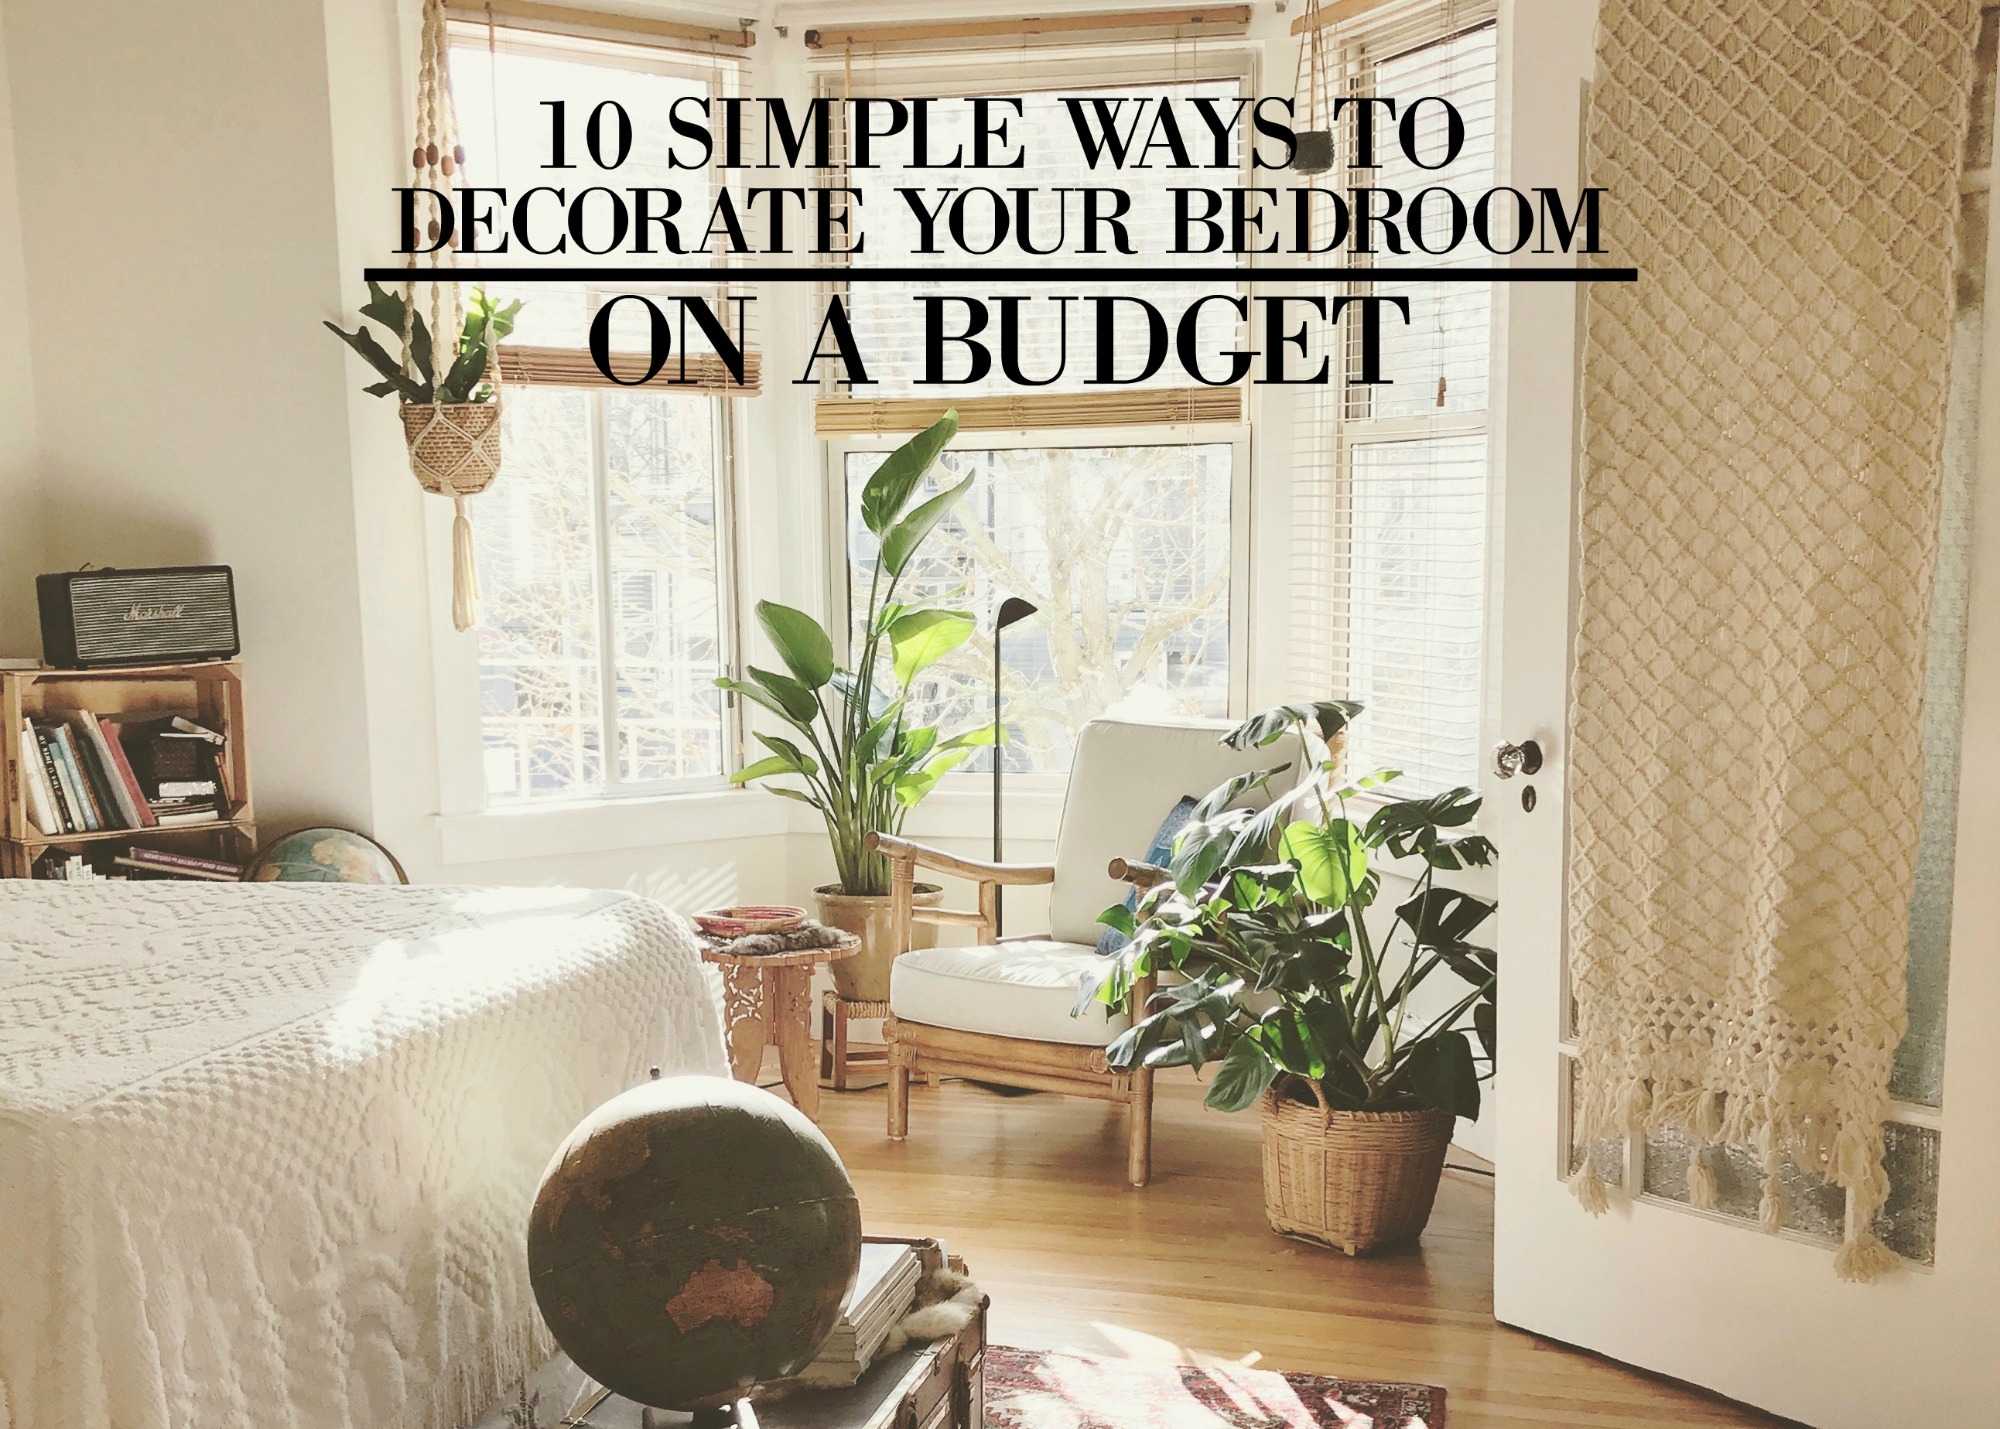 10 Simple Ways To Decorate Your Bedroom On A Budget